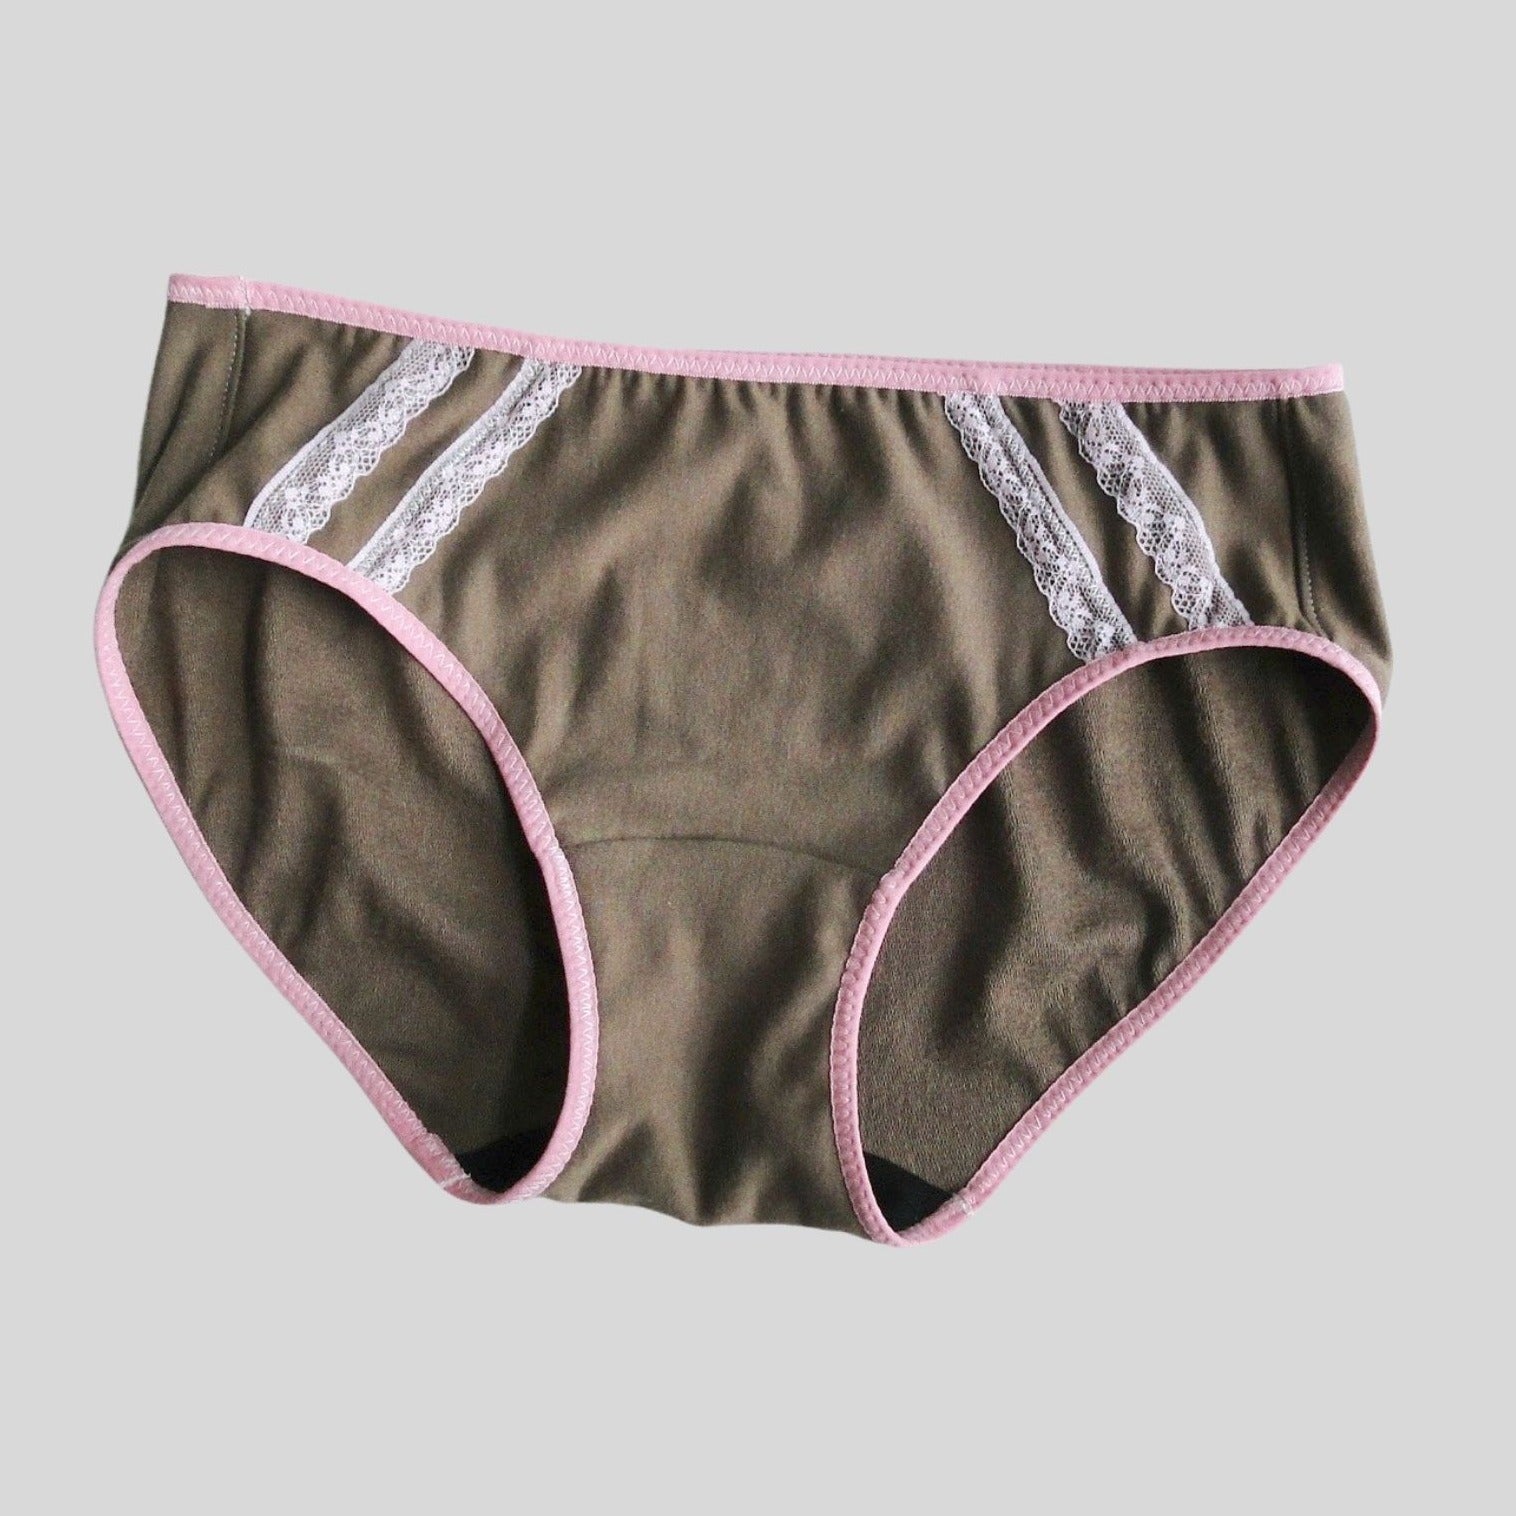 Organic Bamboo Underwear | High-Cut Panty Underwear | White | French Cut  Brief | 90's Style Lingerie | Eco-Friendly | Sustainable